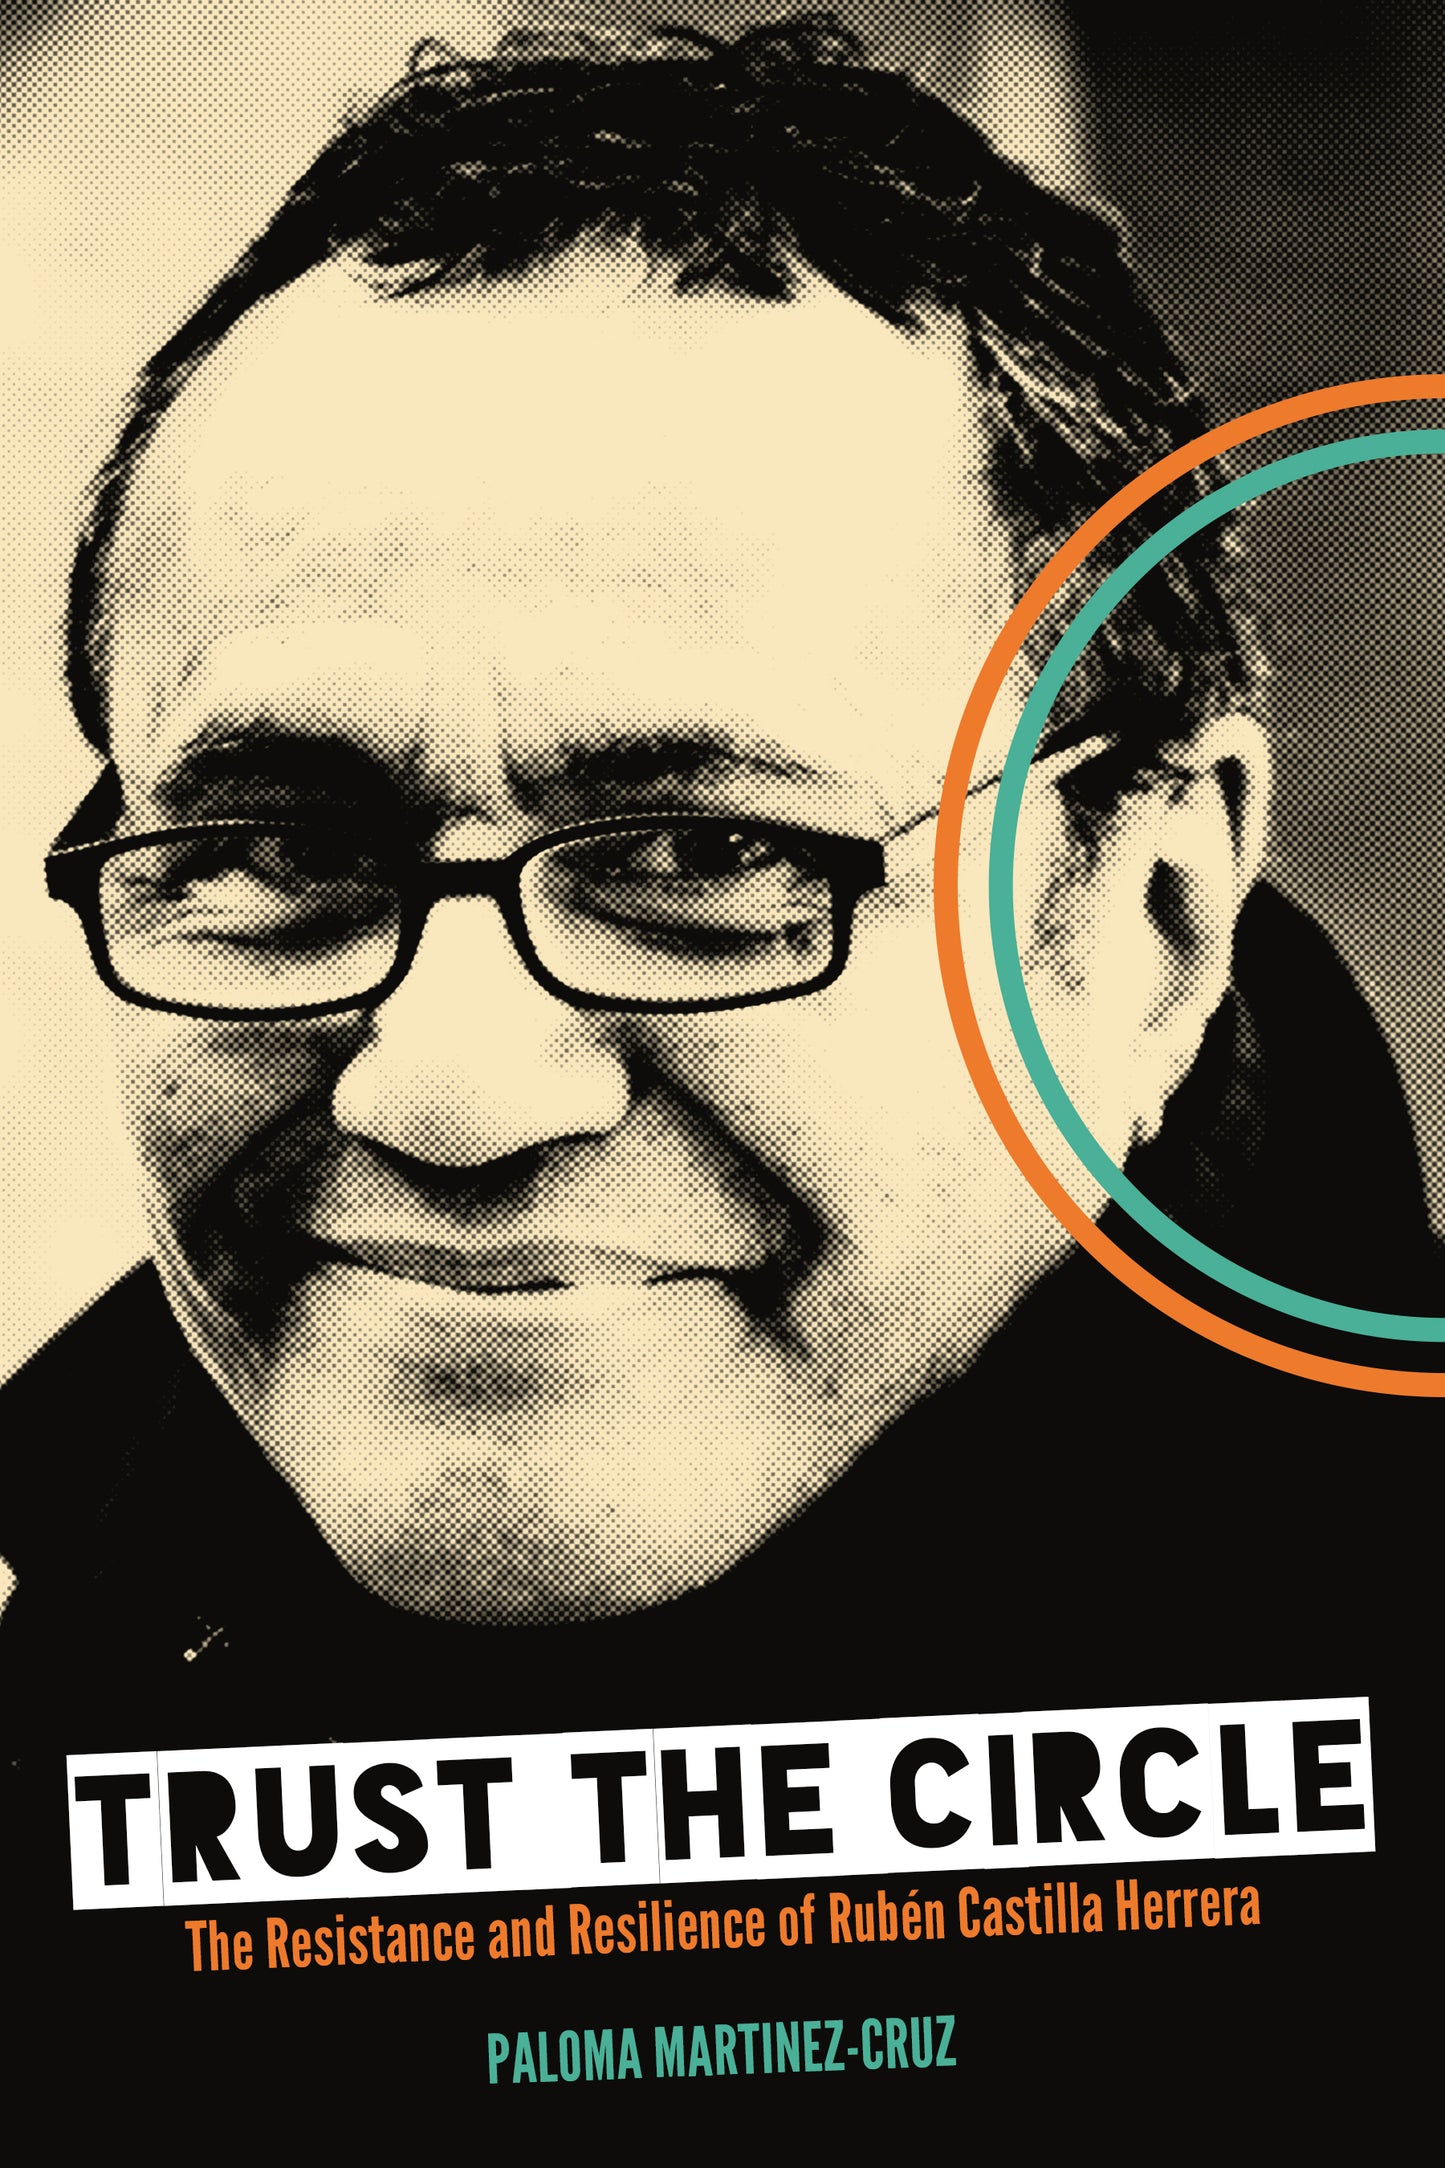 Trust the Circle: The Resistance and Resilience of Rubén Castilla Herrera